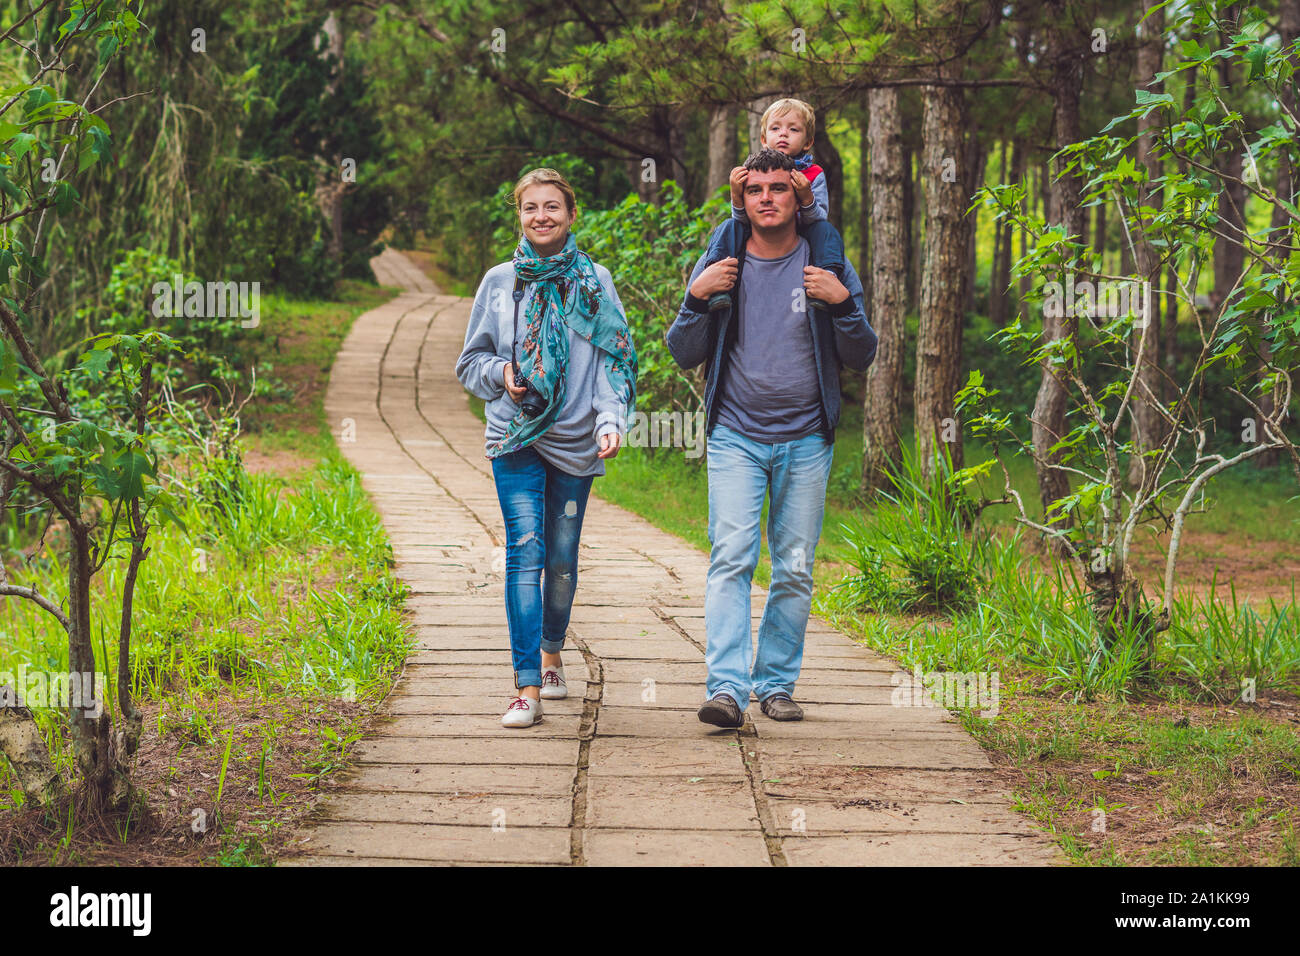 Family, mother, father and son, walking the park path Stock Photo